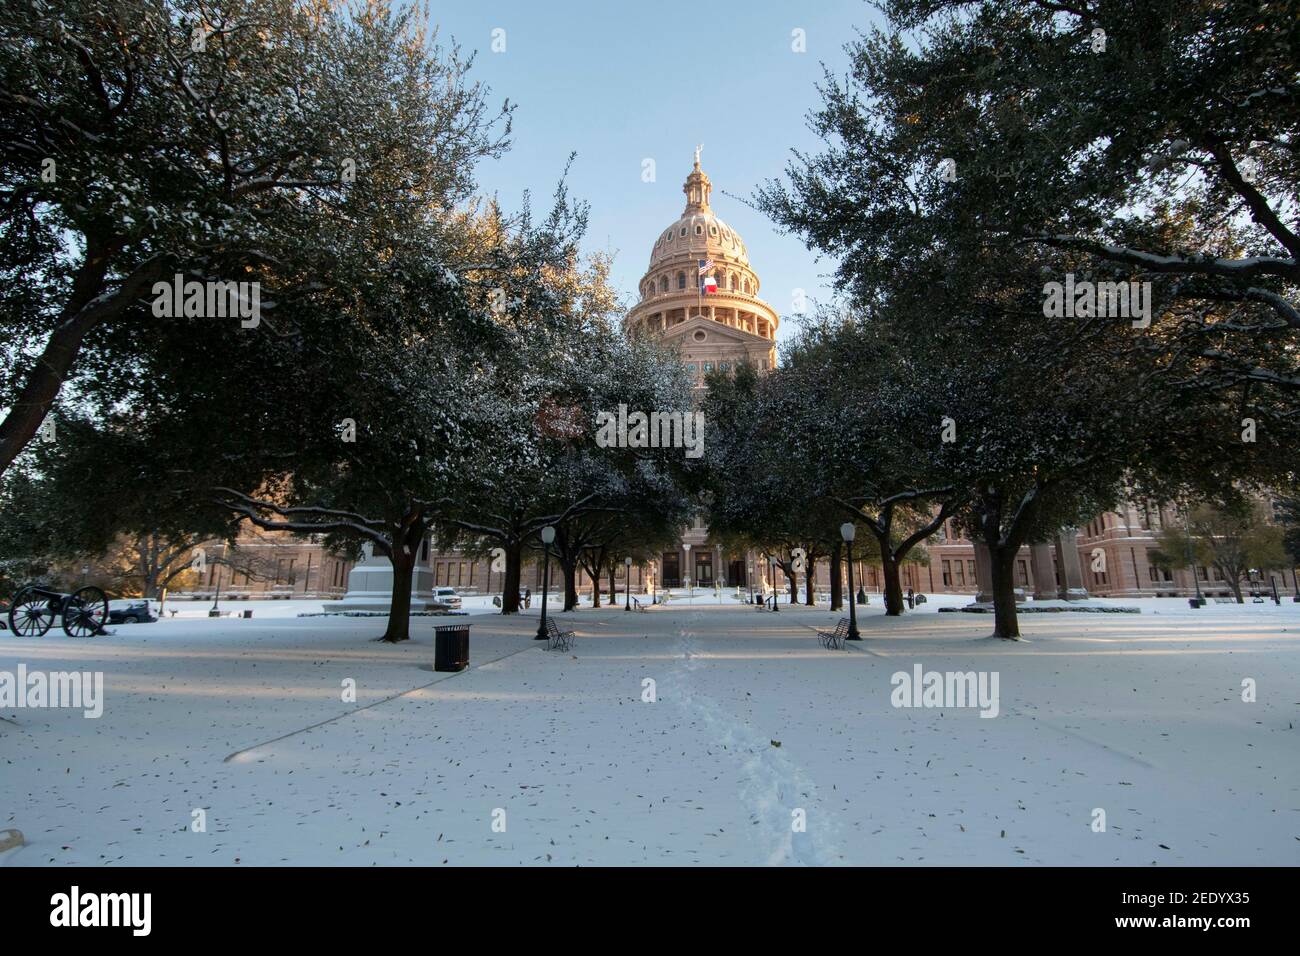 Austin, Texas USA Feb 15, 2021: The Texas Capitol grounds including the south walkway are covered in 6-7 inches of rare snowfall Monday morning after an overnight winter storm blew into central Texas. The accompanying frigid weather wreaked havoc on the state's electricity grid, causing massive power outages to millions of customers across the state. Credit: Bob Daemmrich/Alamy Live News Stock Photo